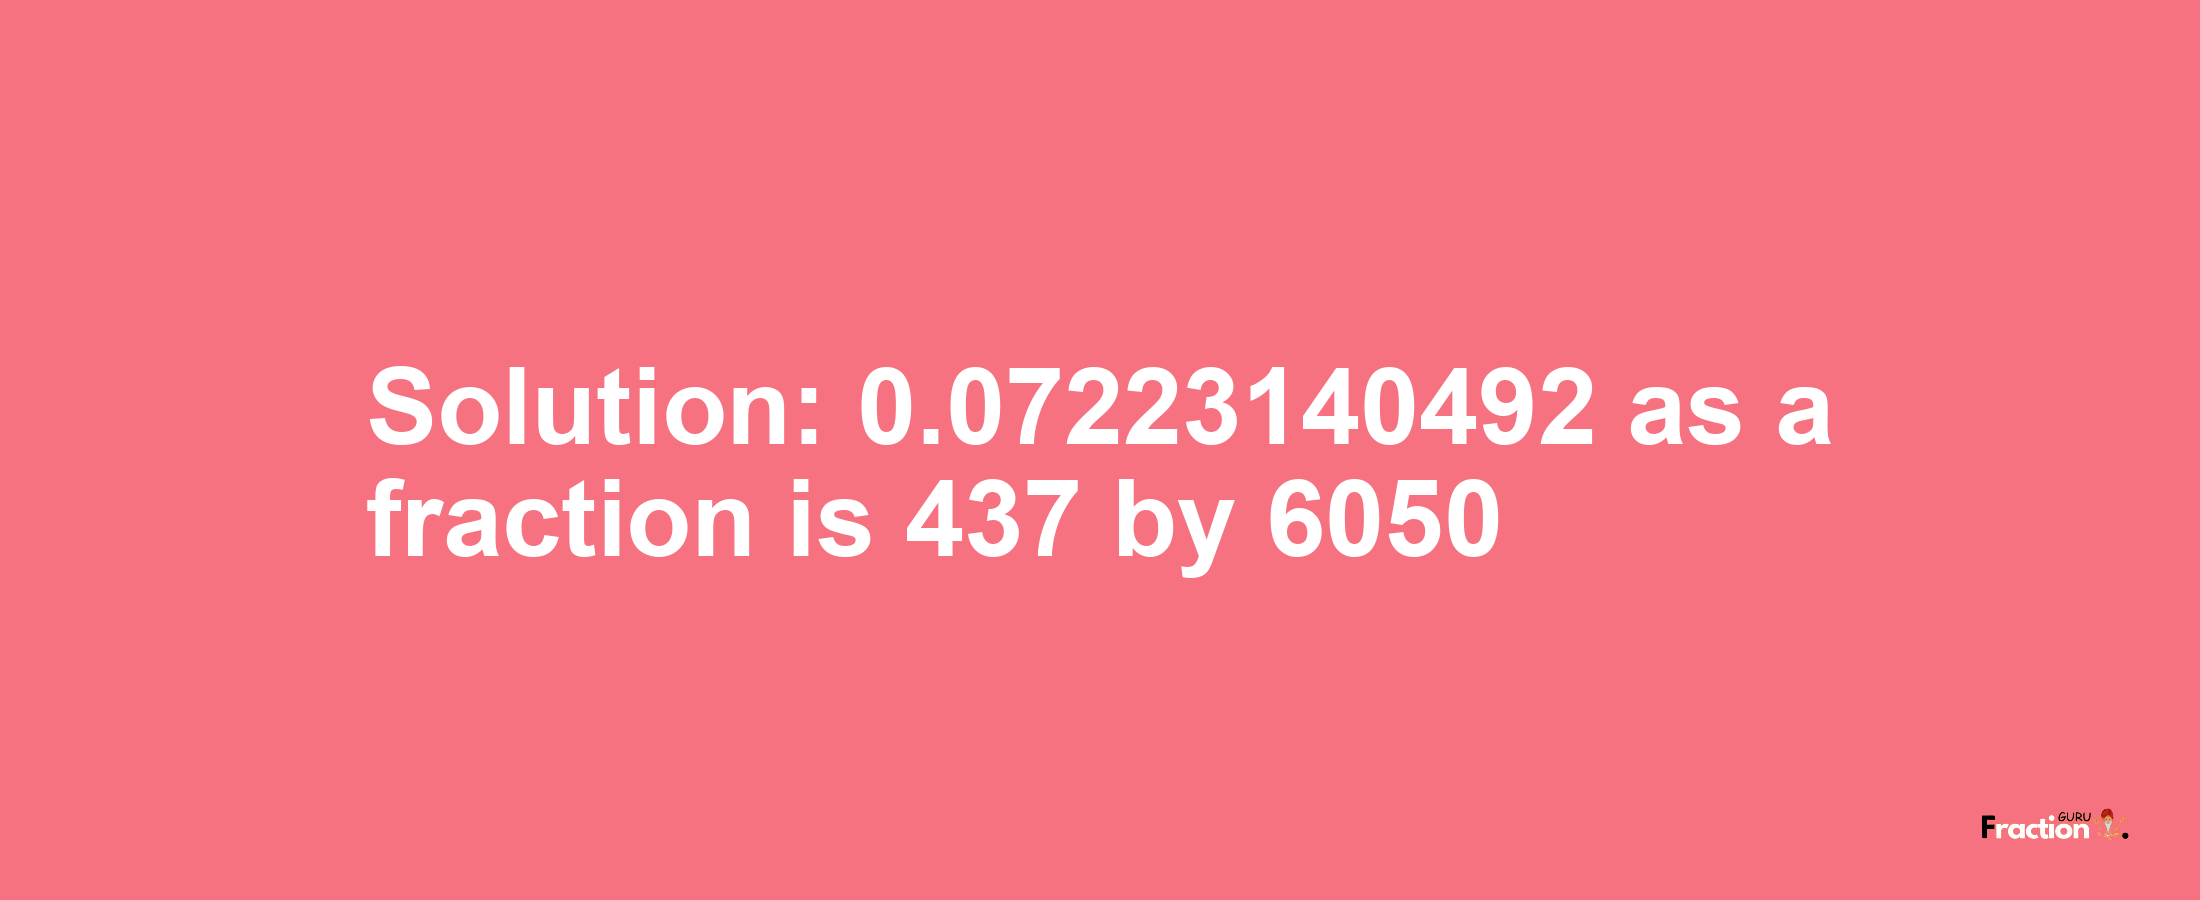 Solution:0.07223140492 as a fraction is 437/6050